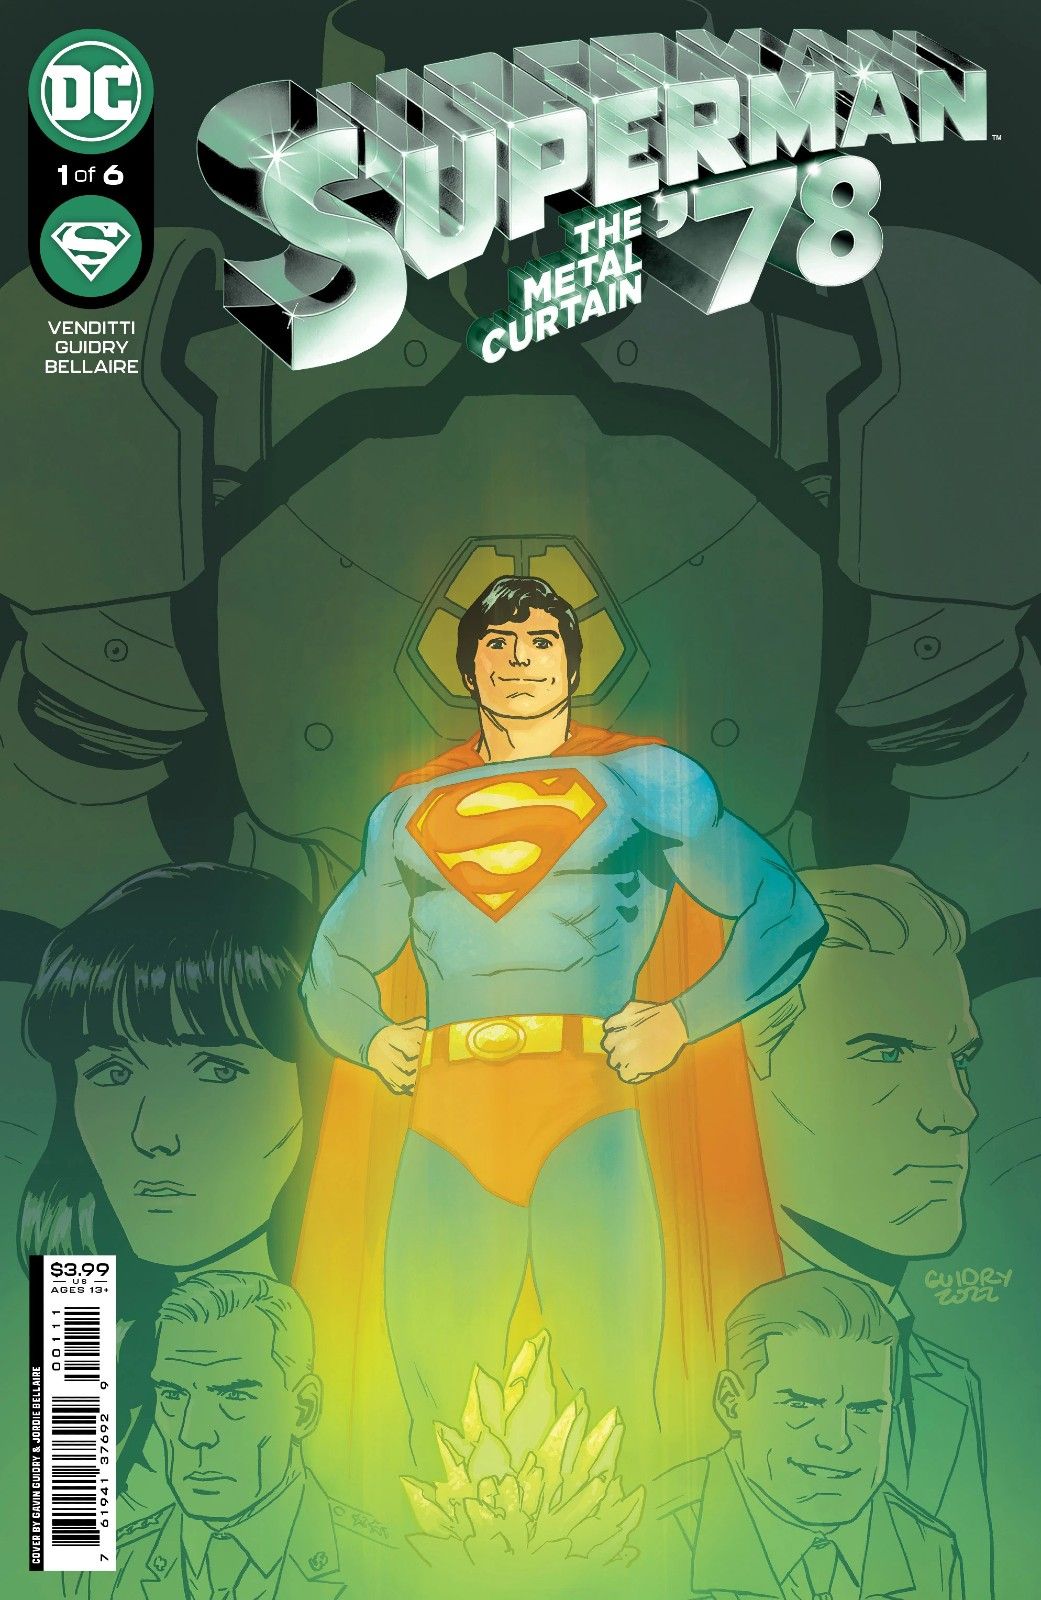 Superman smiling and posing on the cover of Superman '78: The Metal Curtain #1